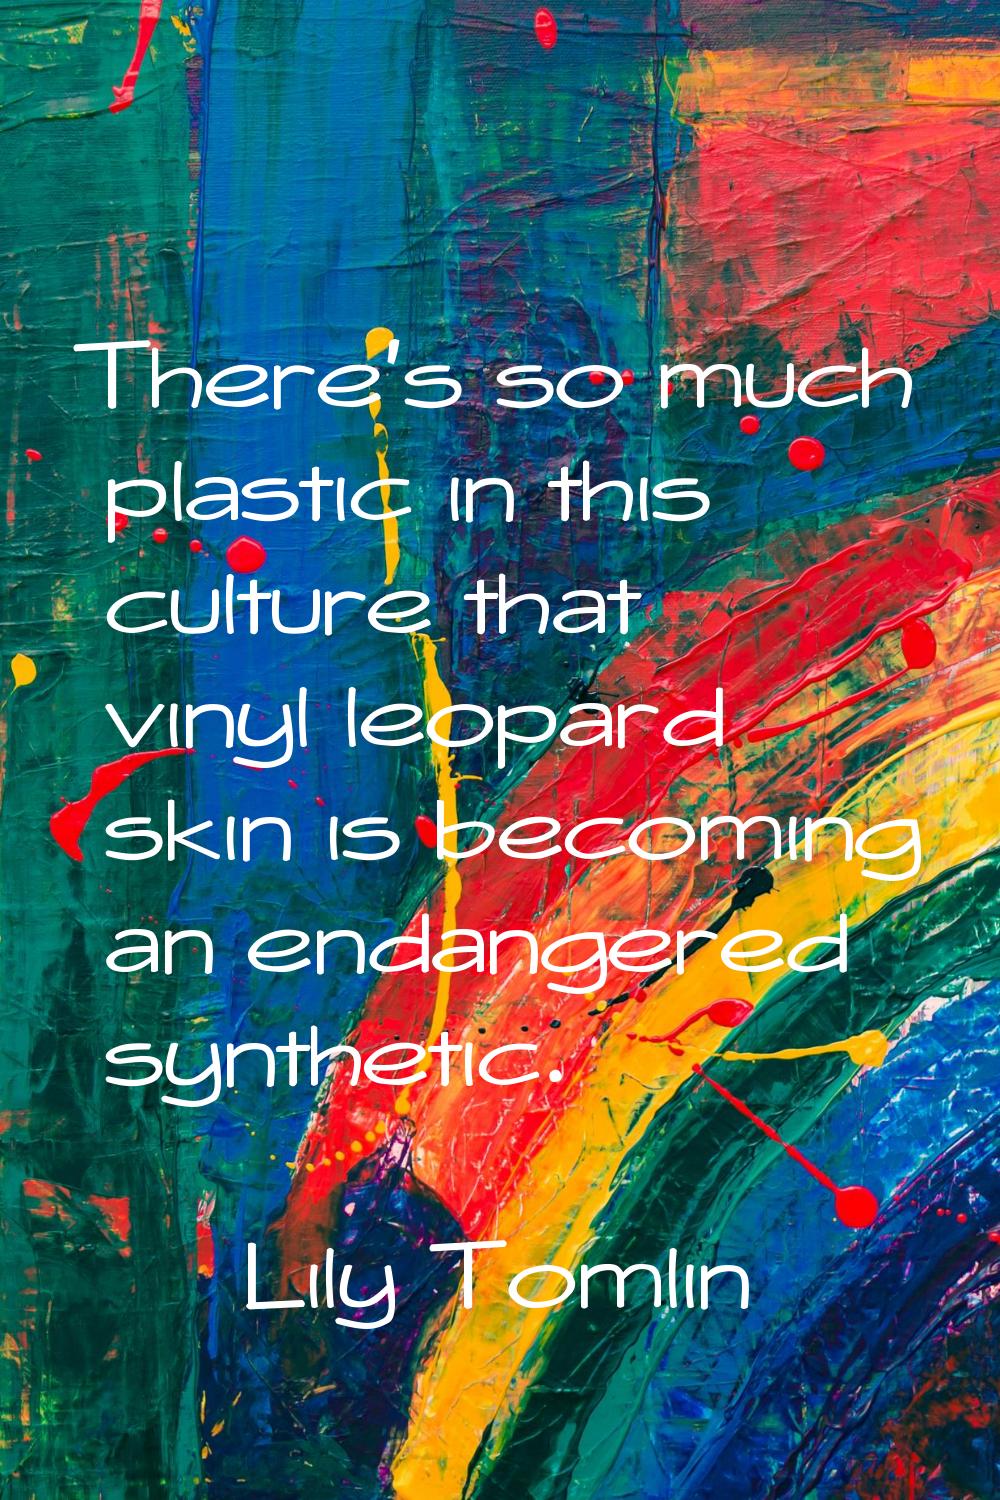 There's so much plastic in this culture that vinyl leopard skin is becoming an endangered synthetic